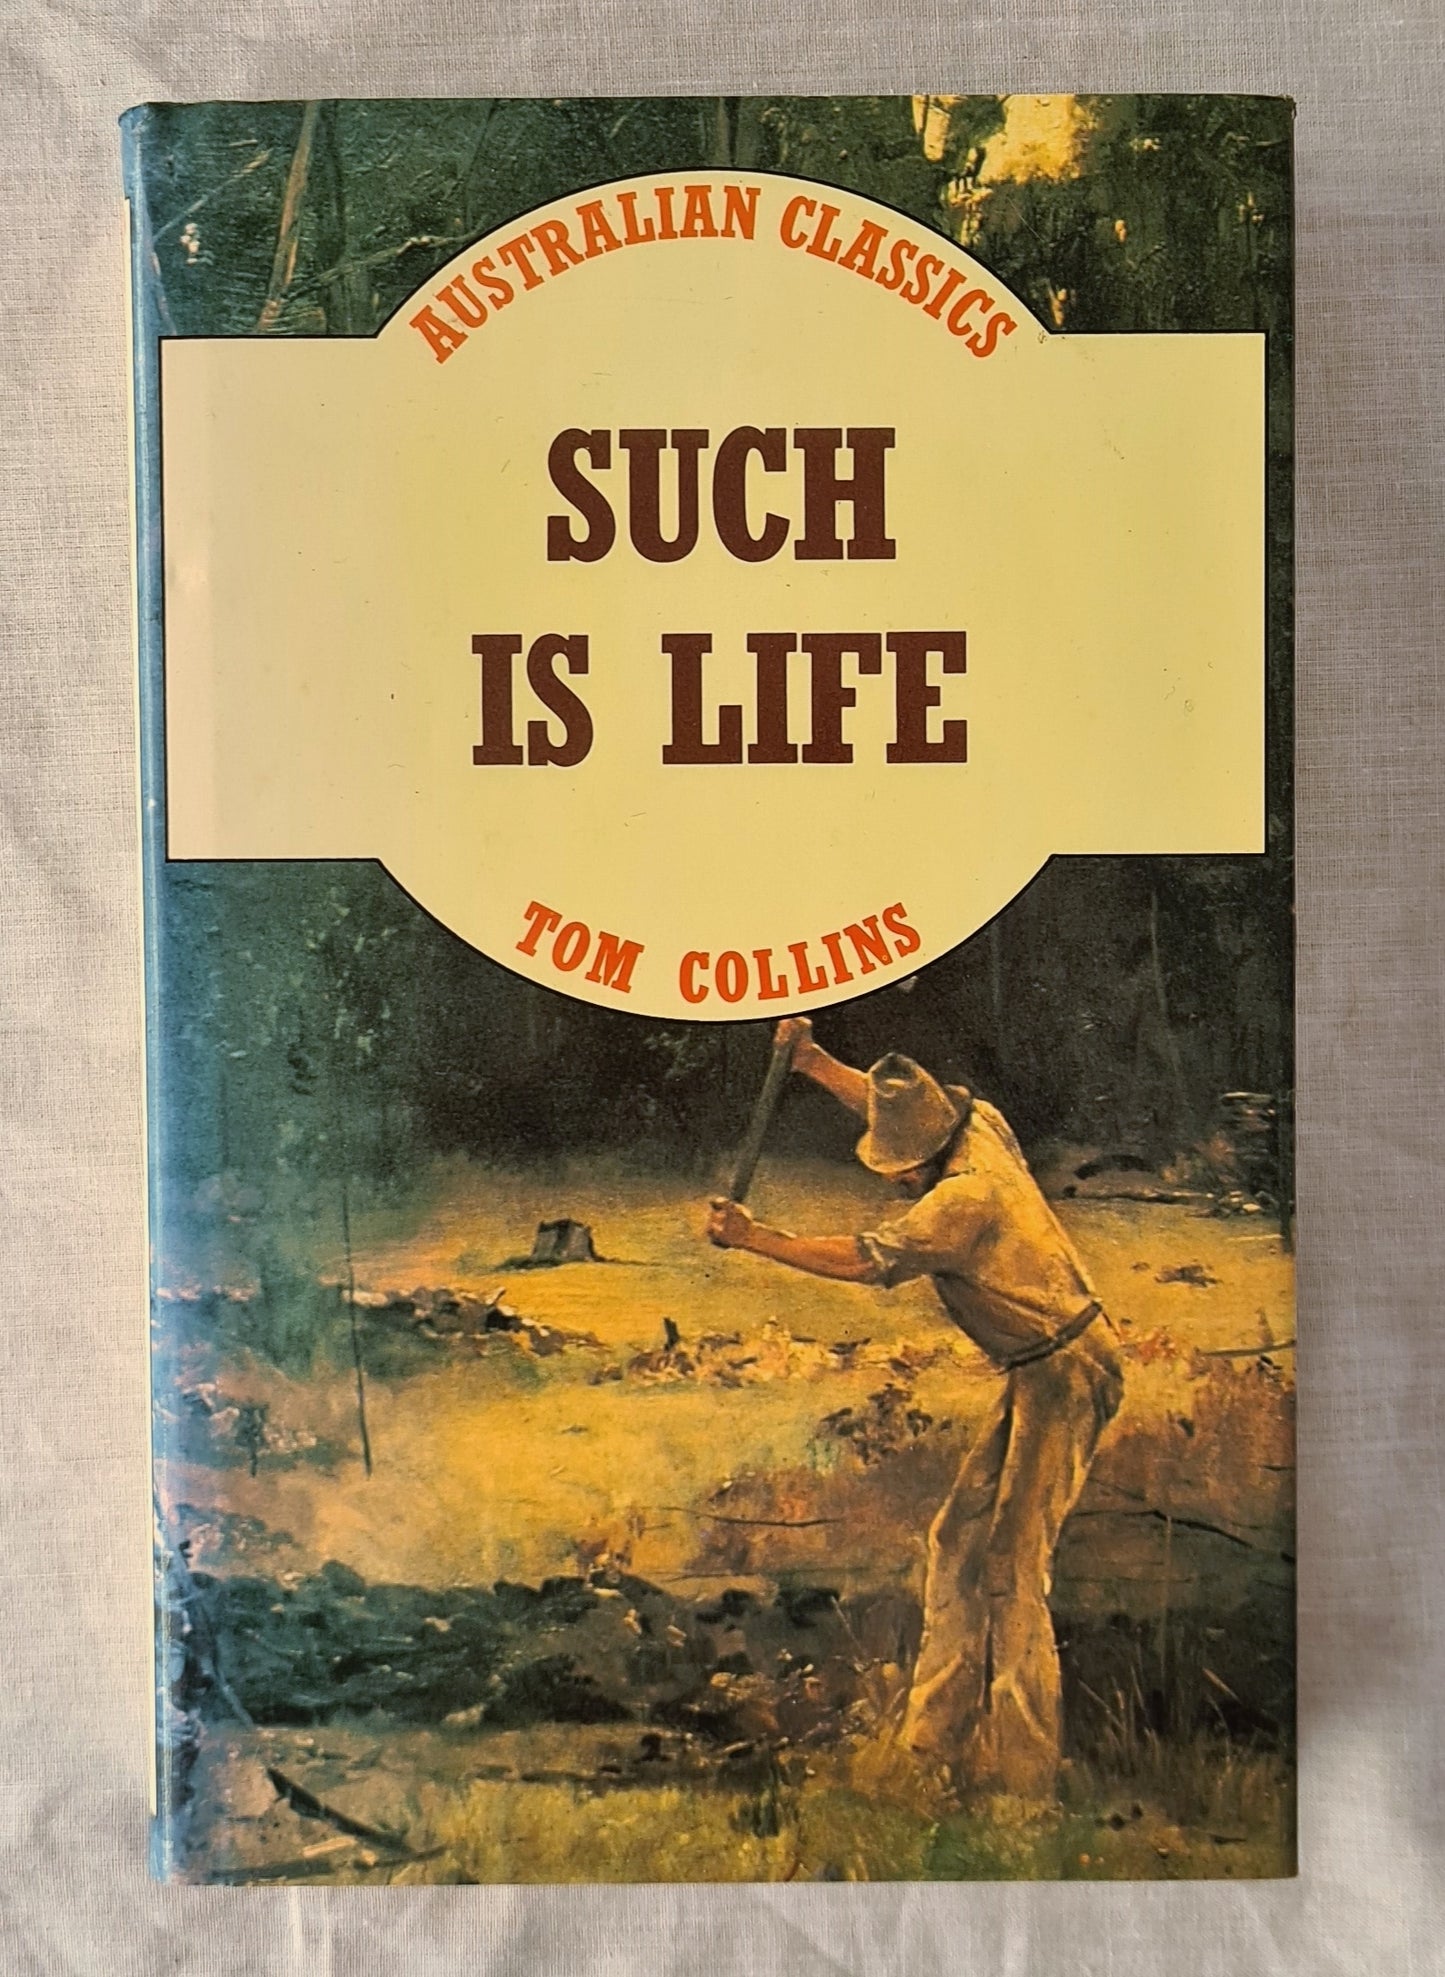 Such Is Life  by Tom Collins  (Australian Classics)